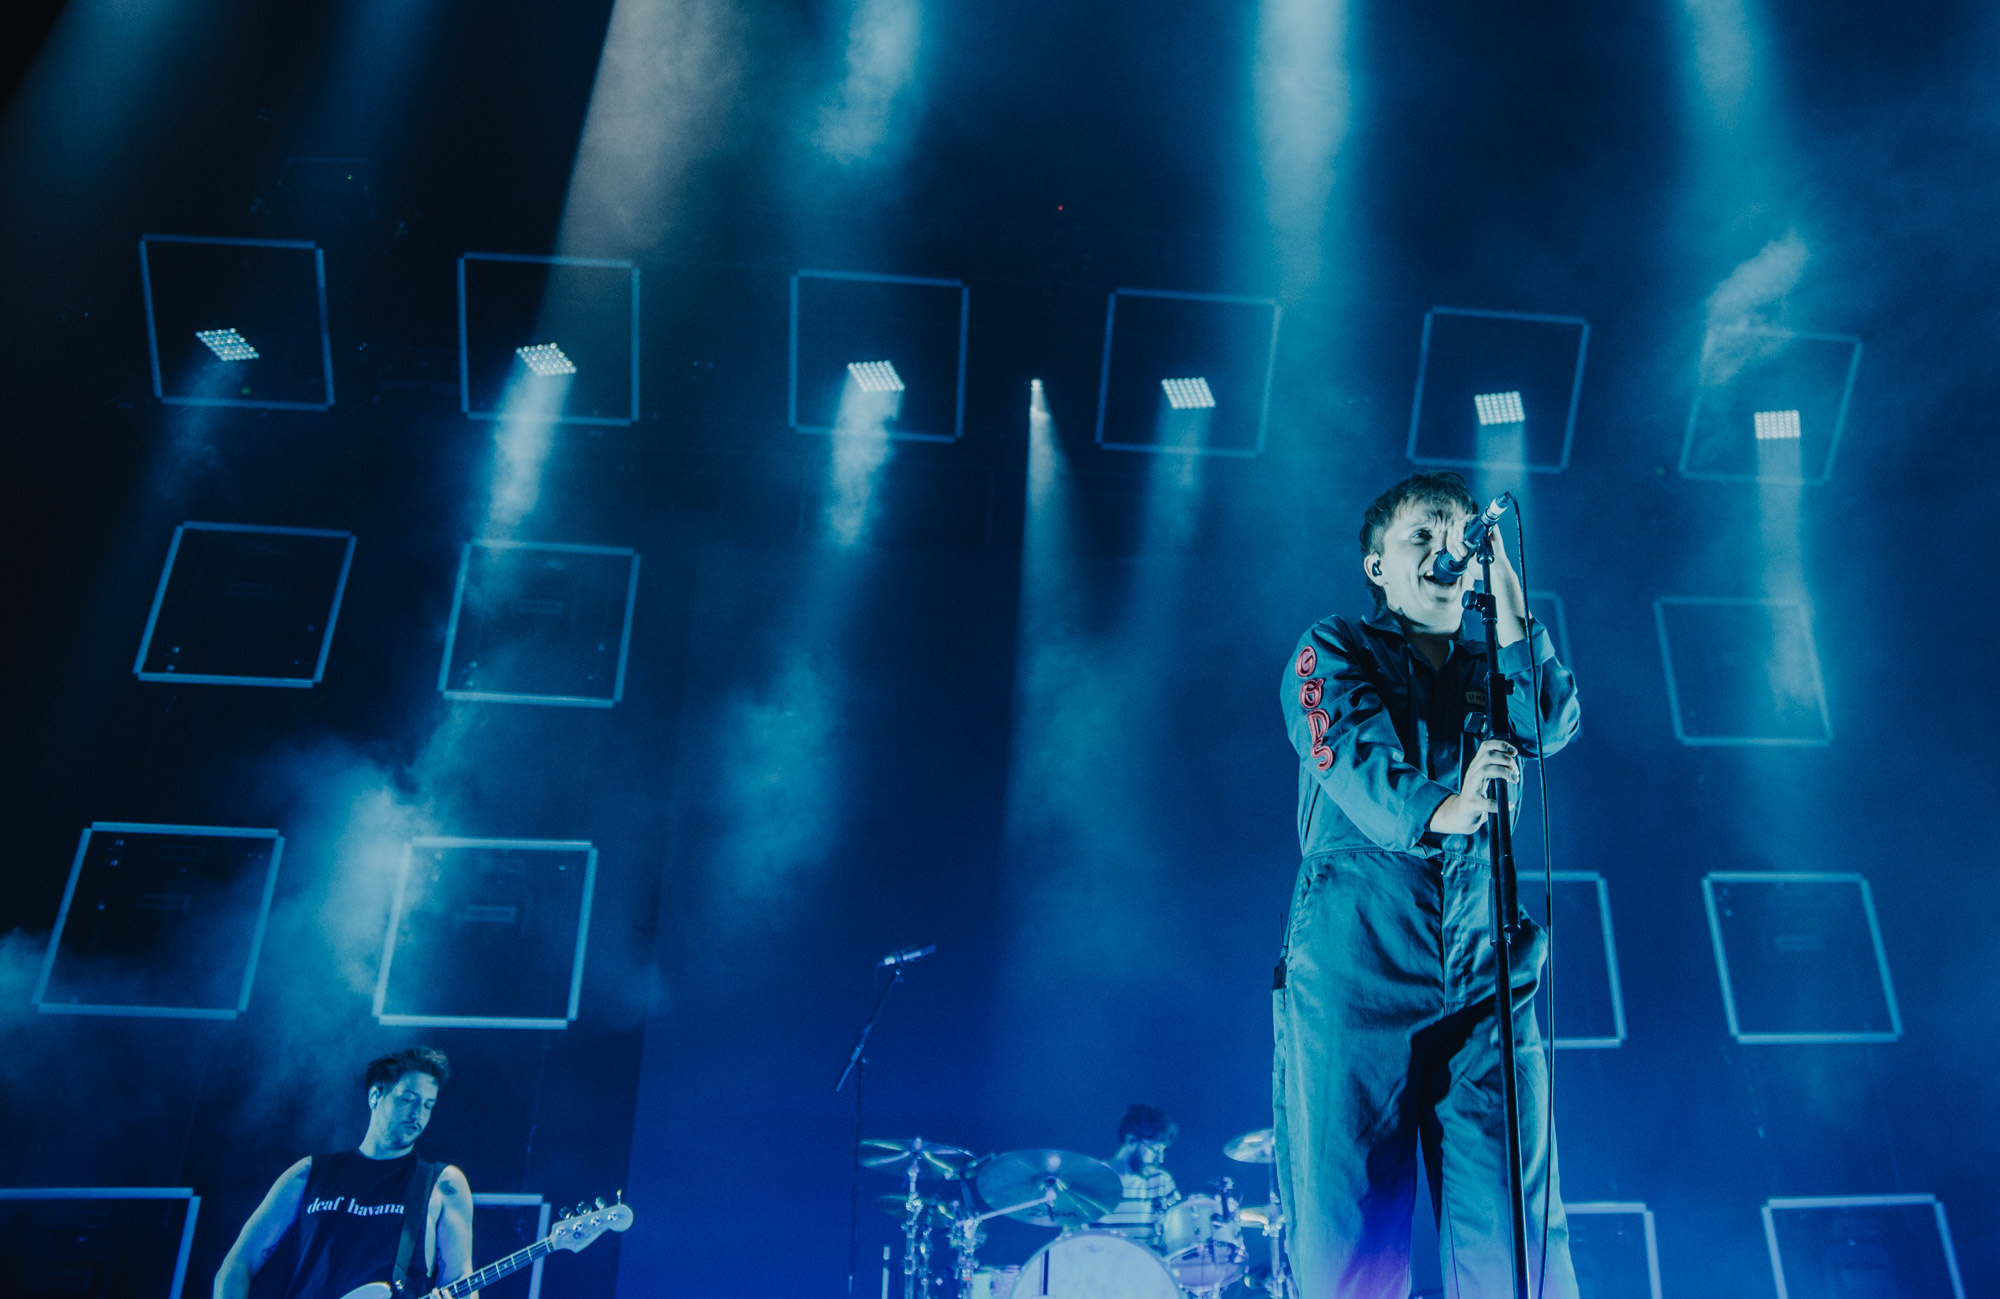 Nothing but Thieves Wallpapers (24+ images inside)